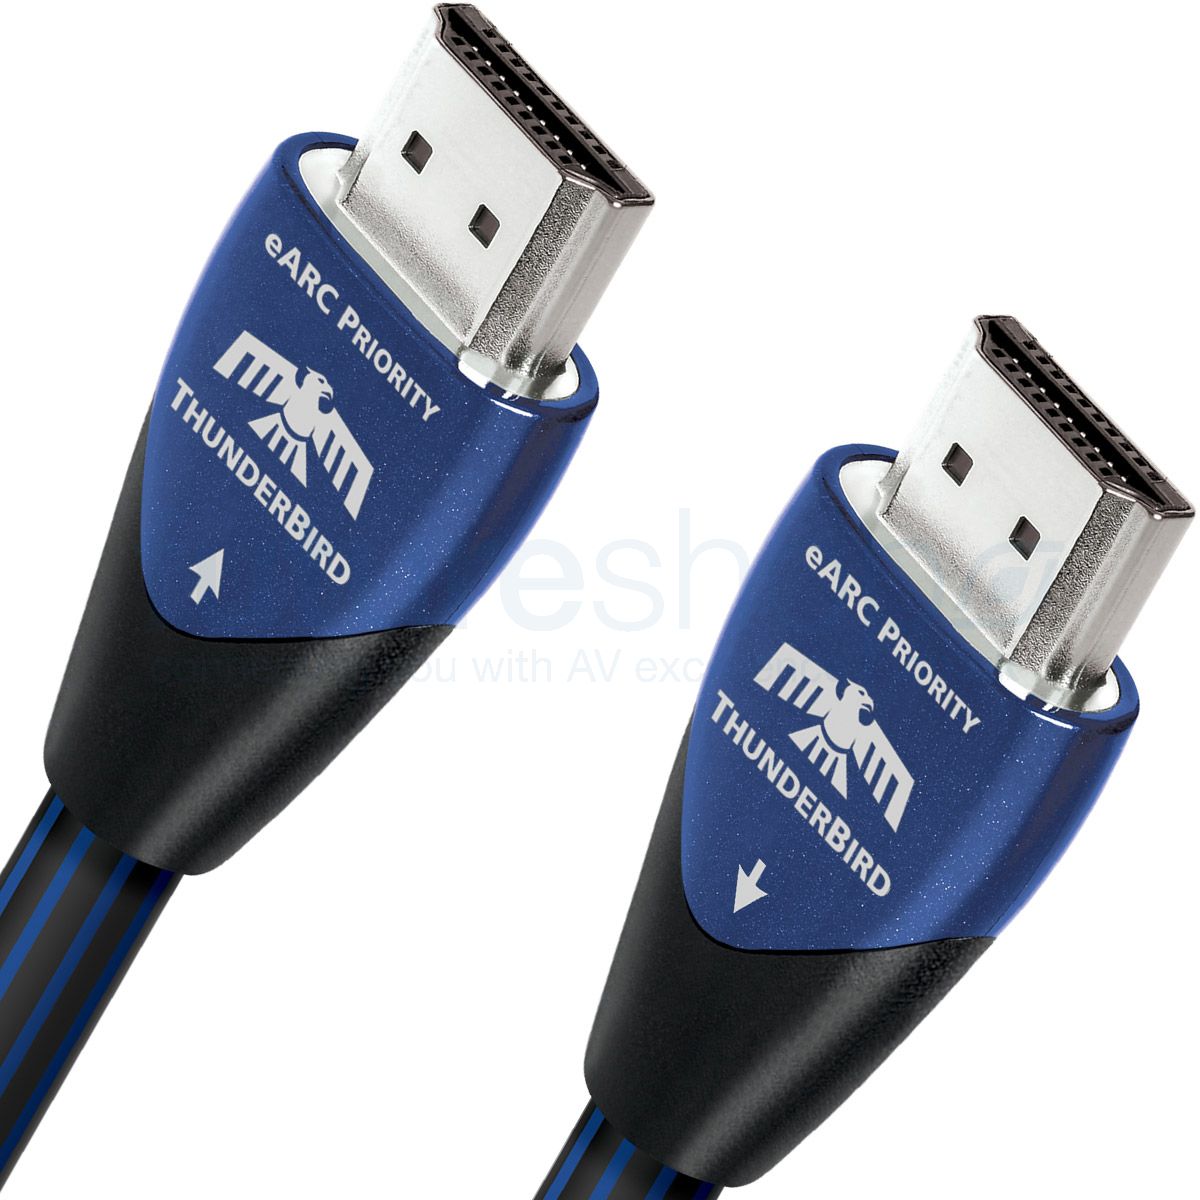 AudioQuest - ThunderBird eARC - HDMI Cable